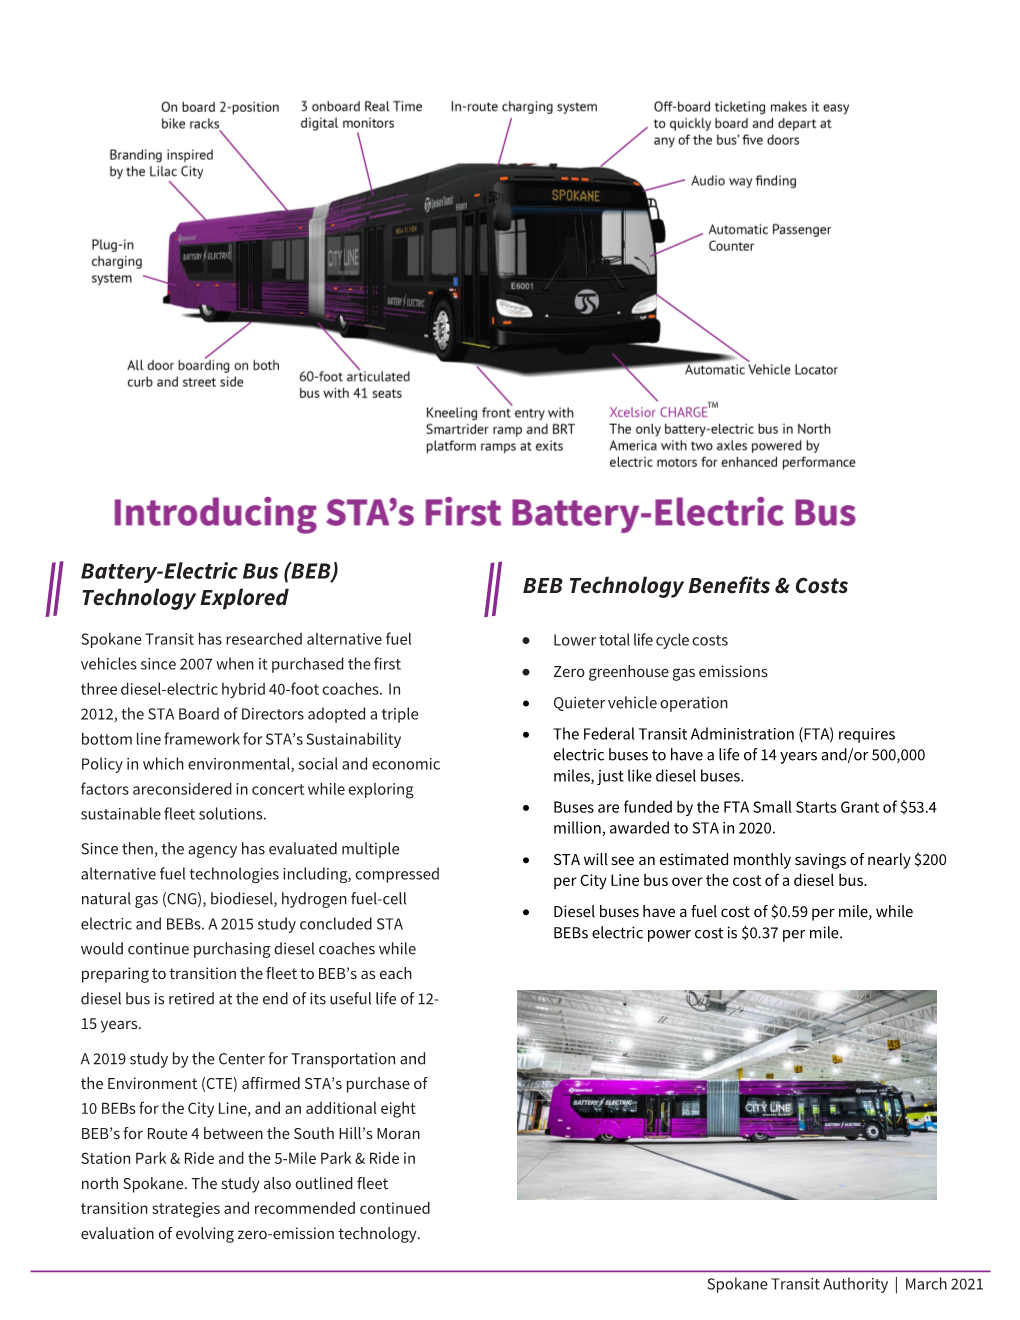 Battery-Electric Bus (BEB) BEB Technology Benefits & Costs Technology Explored